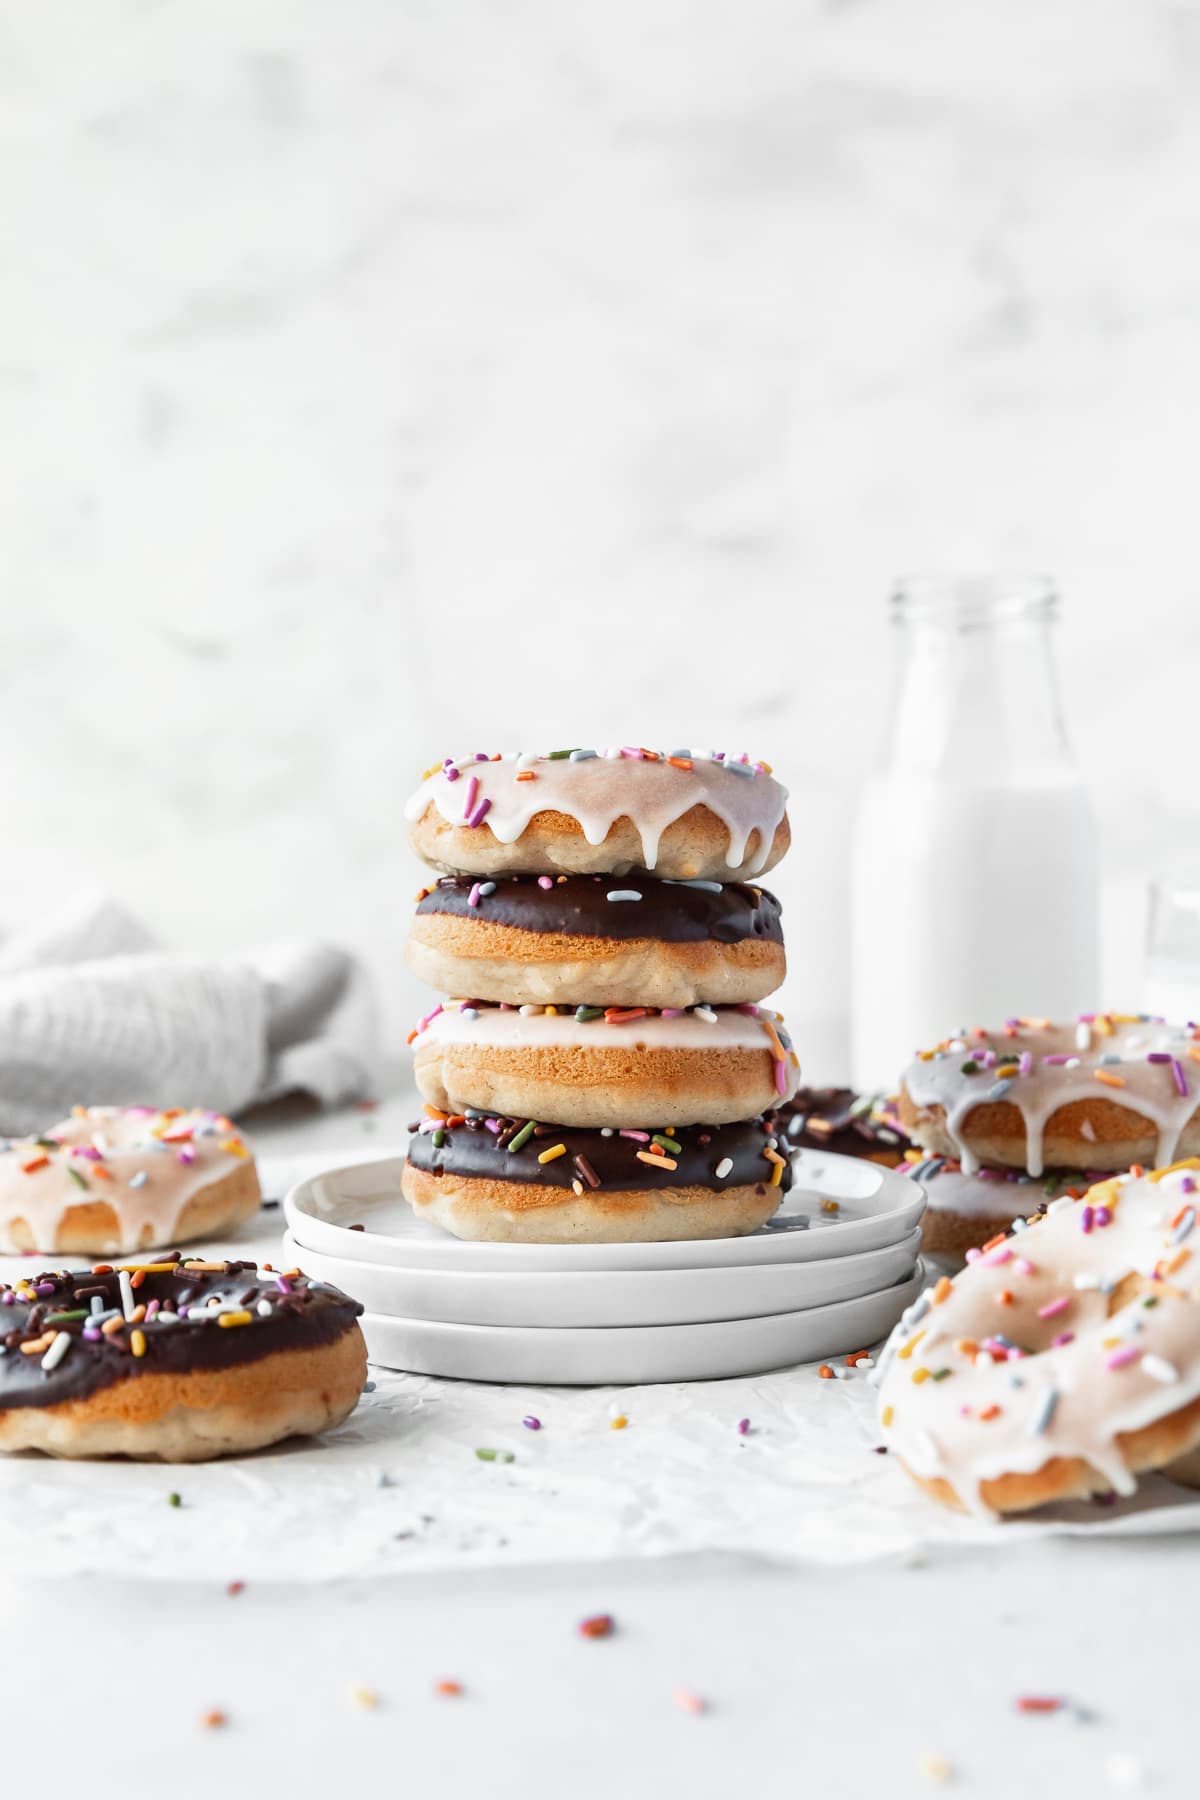 Stack of alternating chocolate and vanilla glazed baked vegan donuts on a stack of white dessert plates with a jug of non-dairy milk in the background.